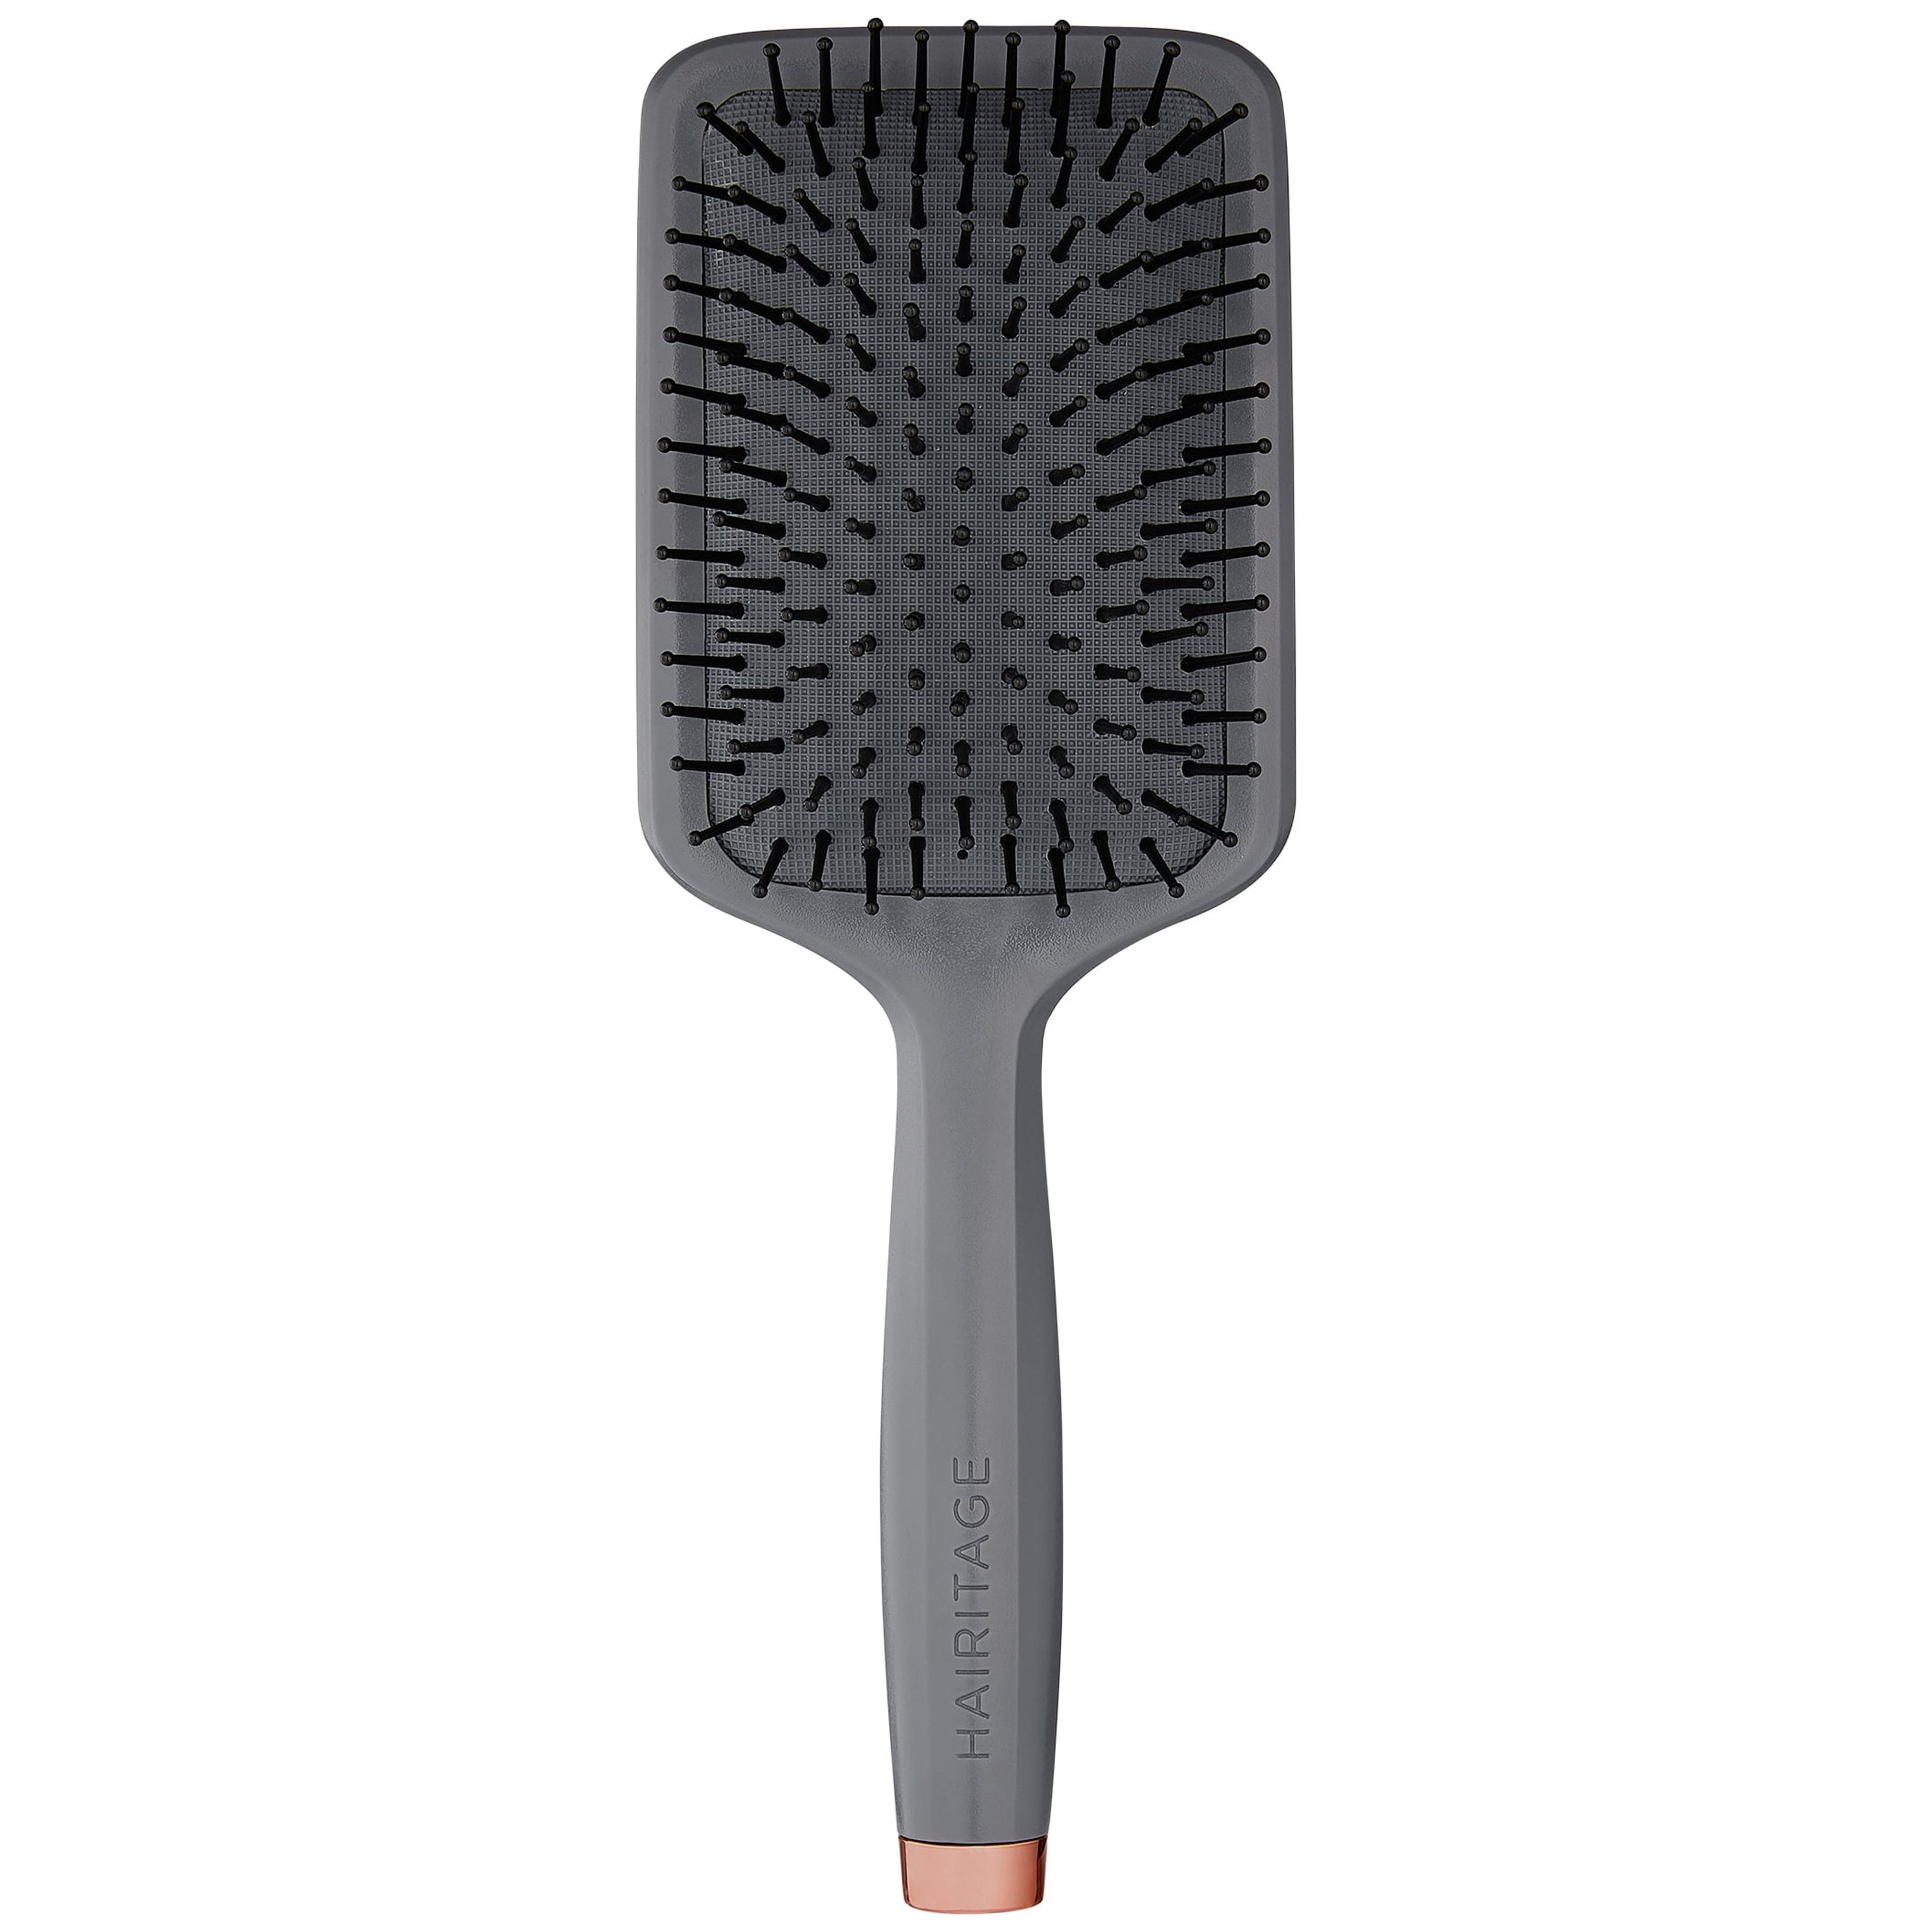 Hairitage Brush It Off Detangling & Smoothing Paddle Hair Brush for Women | Anti Frizz | for Wet & Dry Hair, 1 PC - image 1 of 12